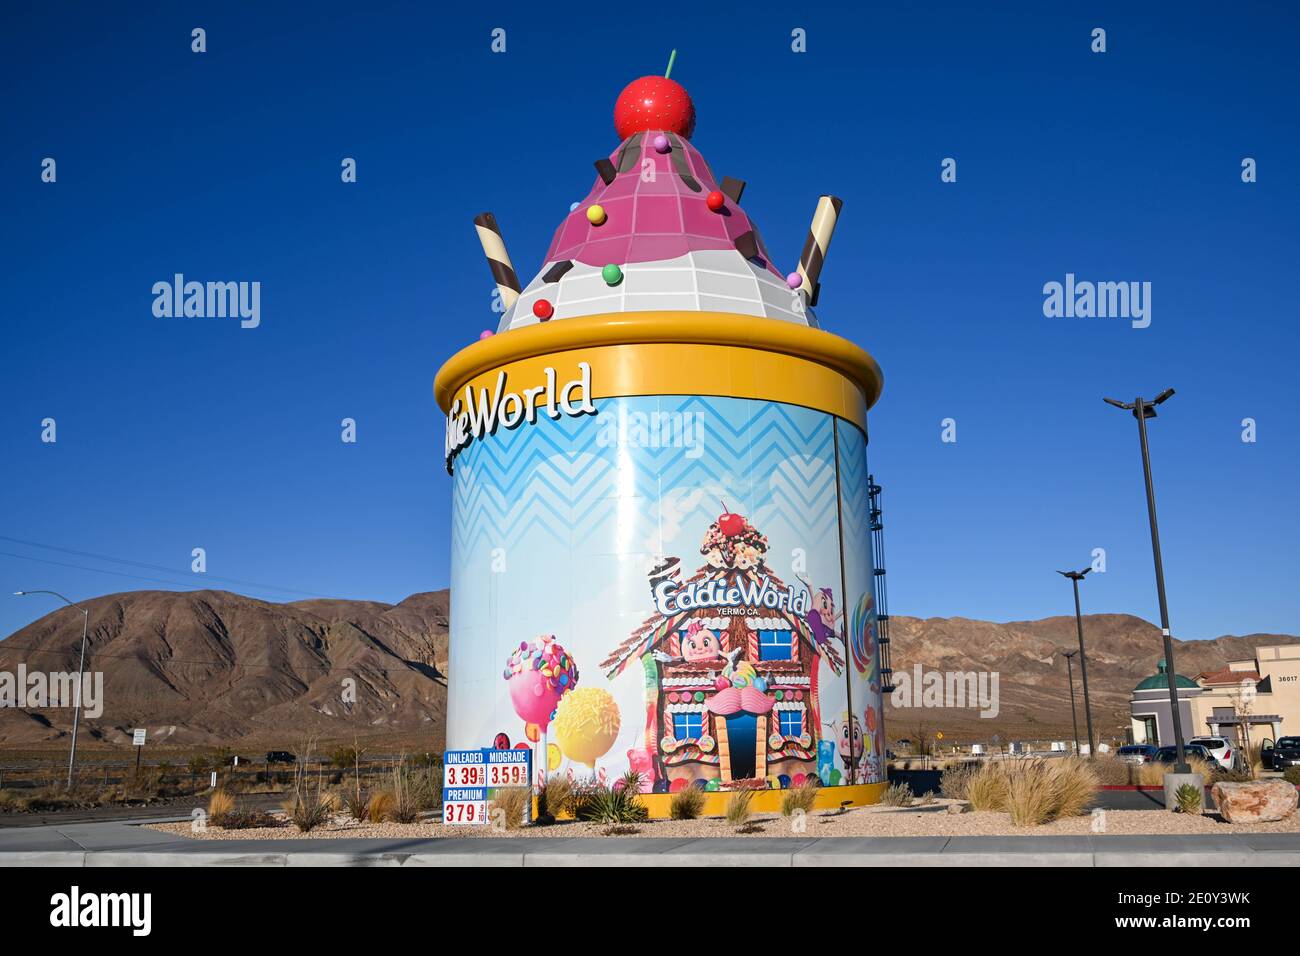 A General view of Eddie World minimarket and benzina station, Tuesday, Dec. 29, 2020 in Yermo, California (Dylan Stewart/Image of Sport) Foto Stock